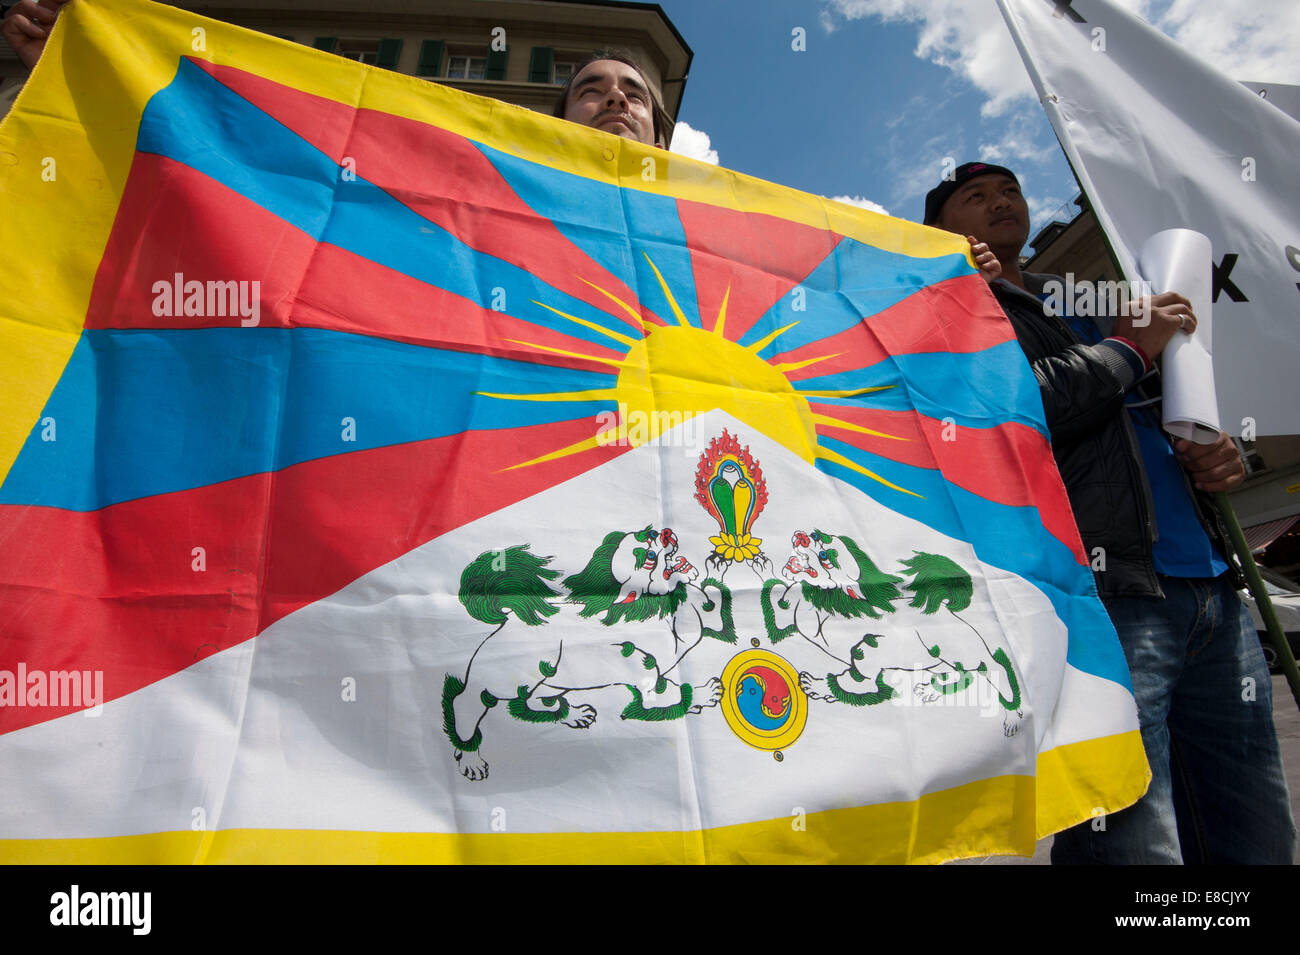 Tibetan activists protest during the visit of China's Premier Li Keqiang in Switzerland's capital Bern. Stock Photo